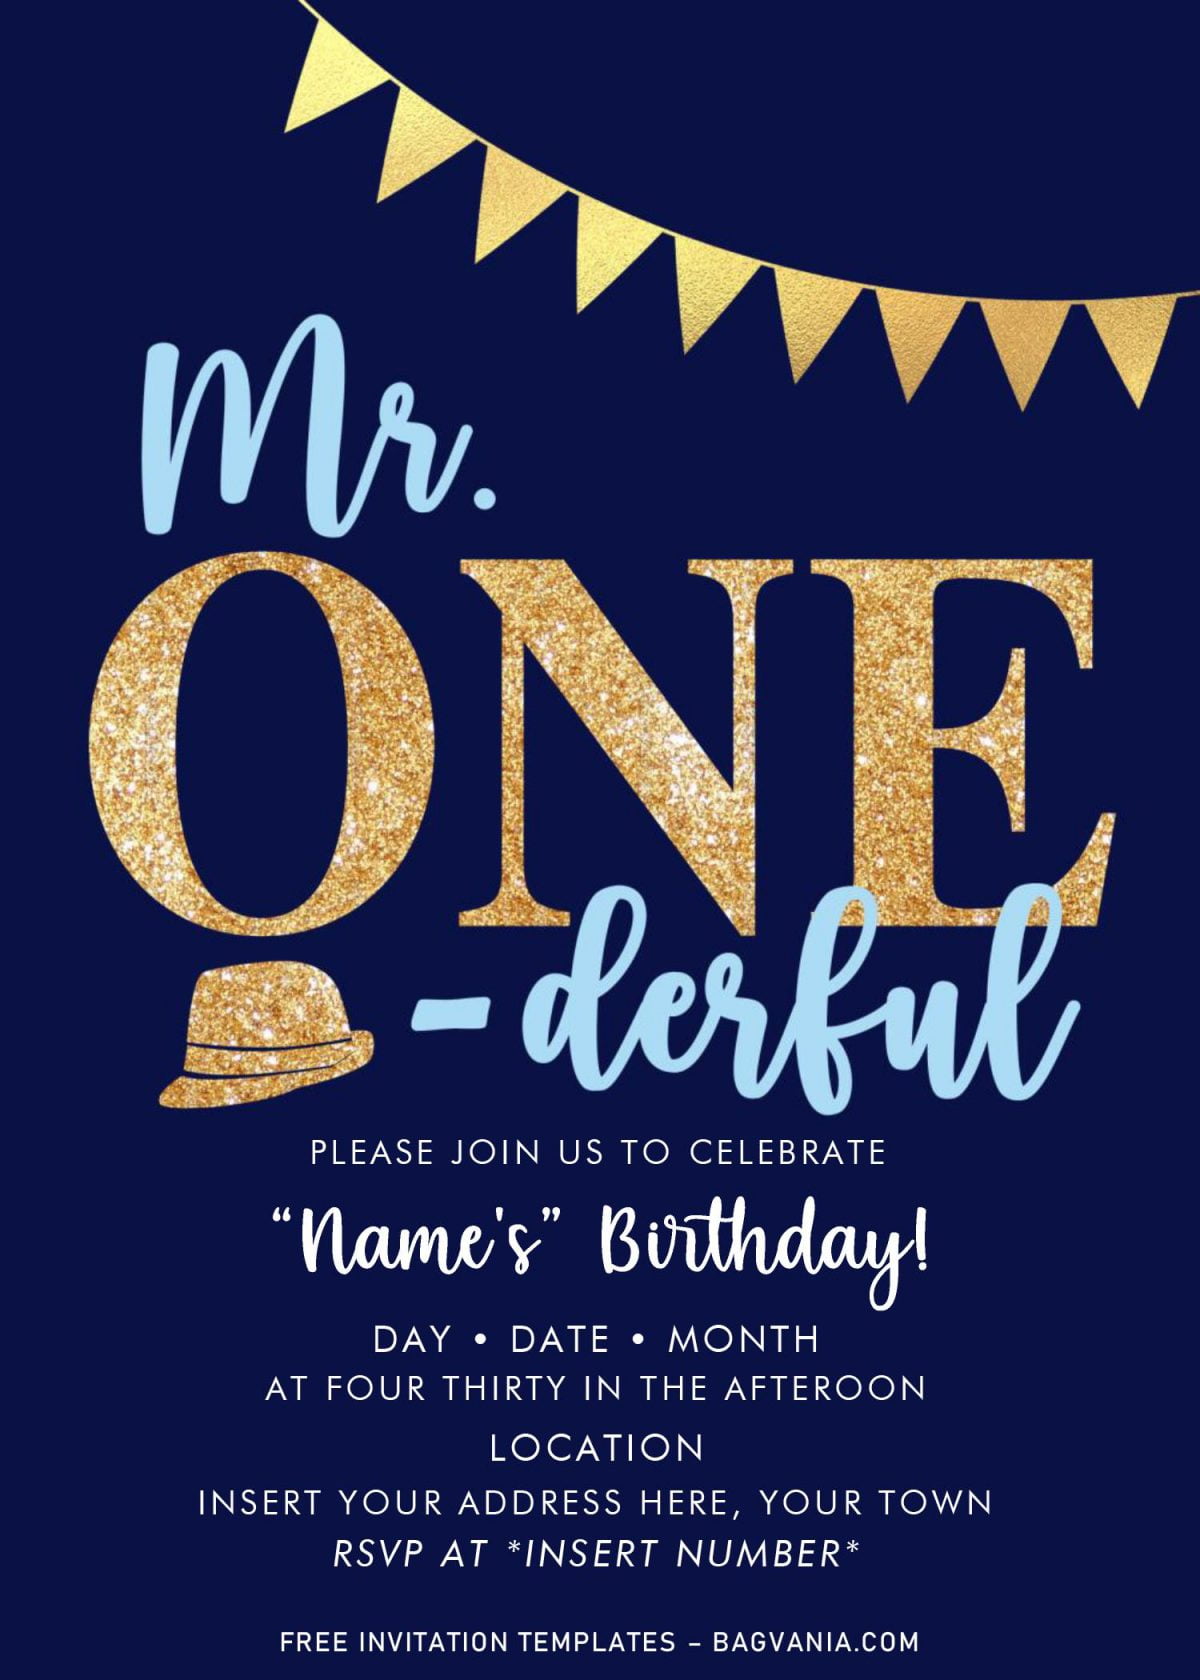 Free Mr. Onederful Birthday Party Invitation Templates For Word and has navy blue background